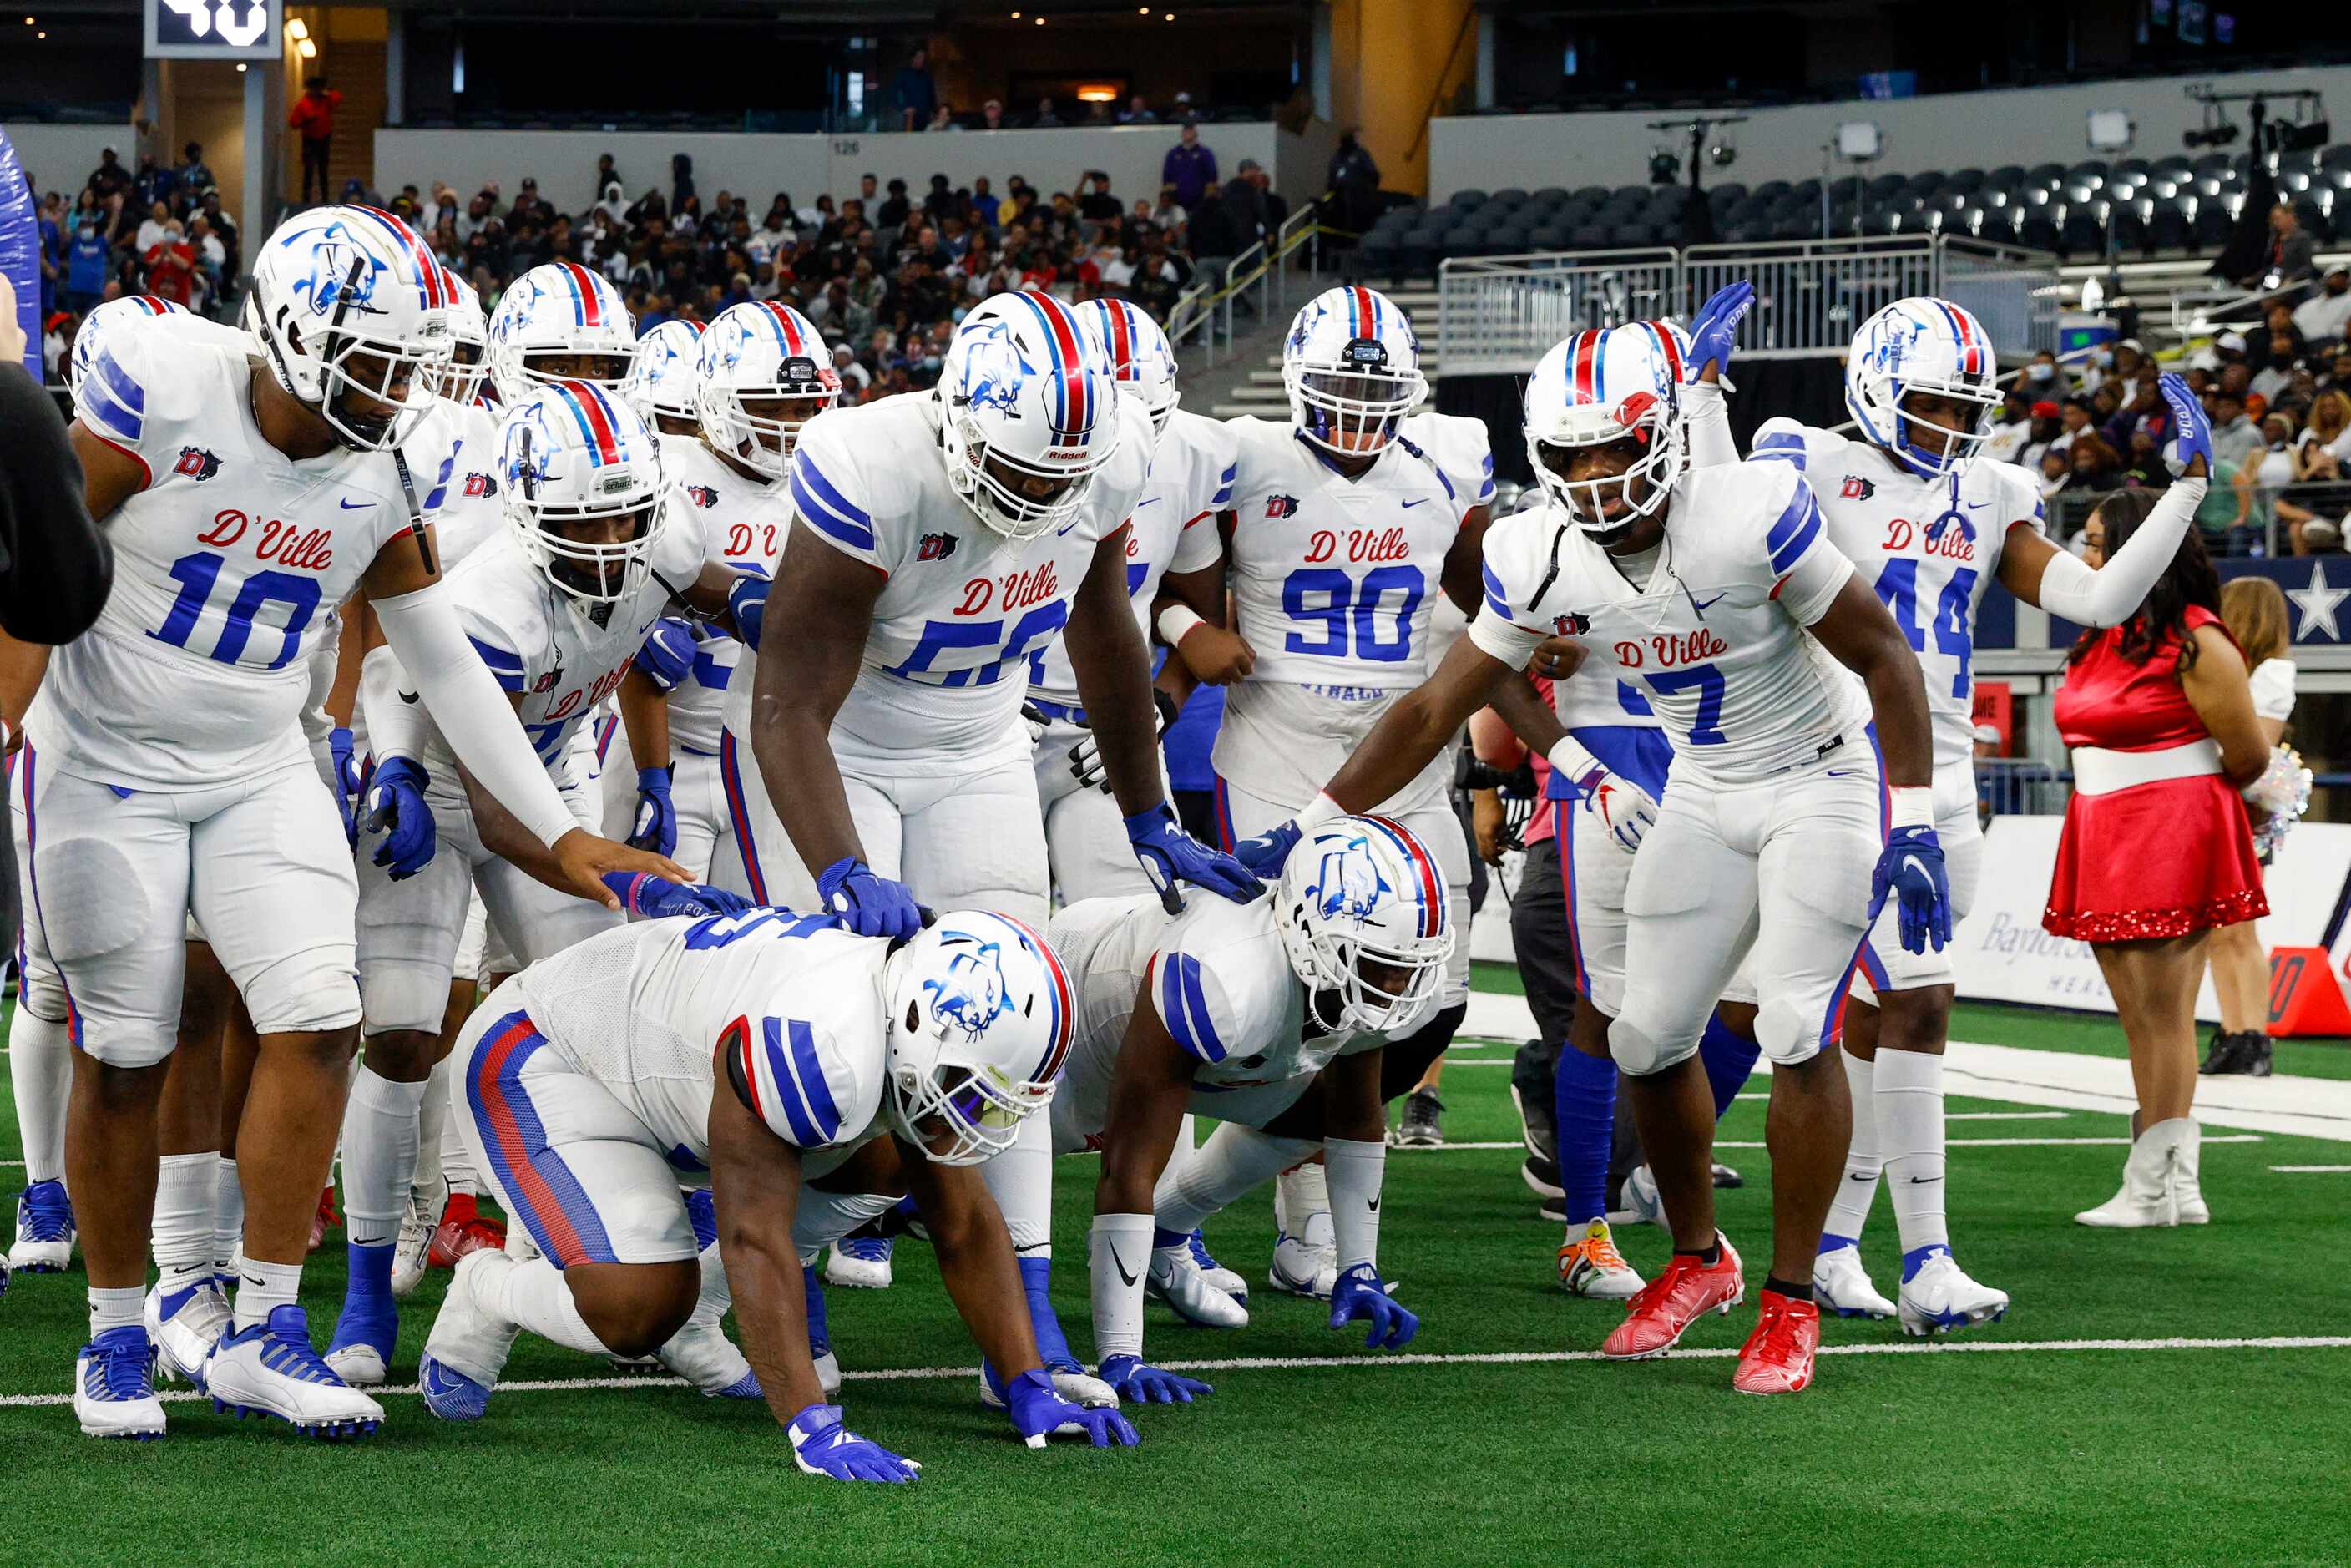 The Duncanville team takes the field before kickoff of their Class 6A Division I state...